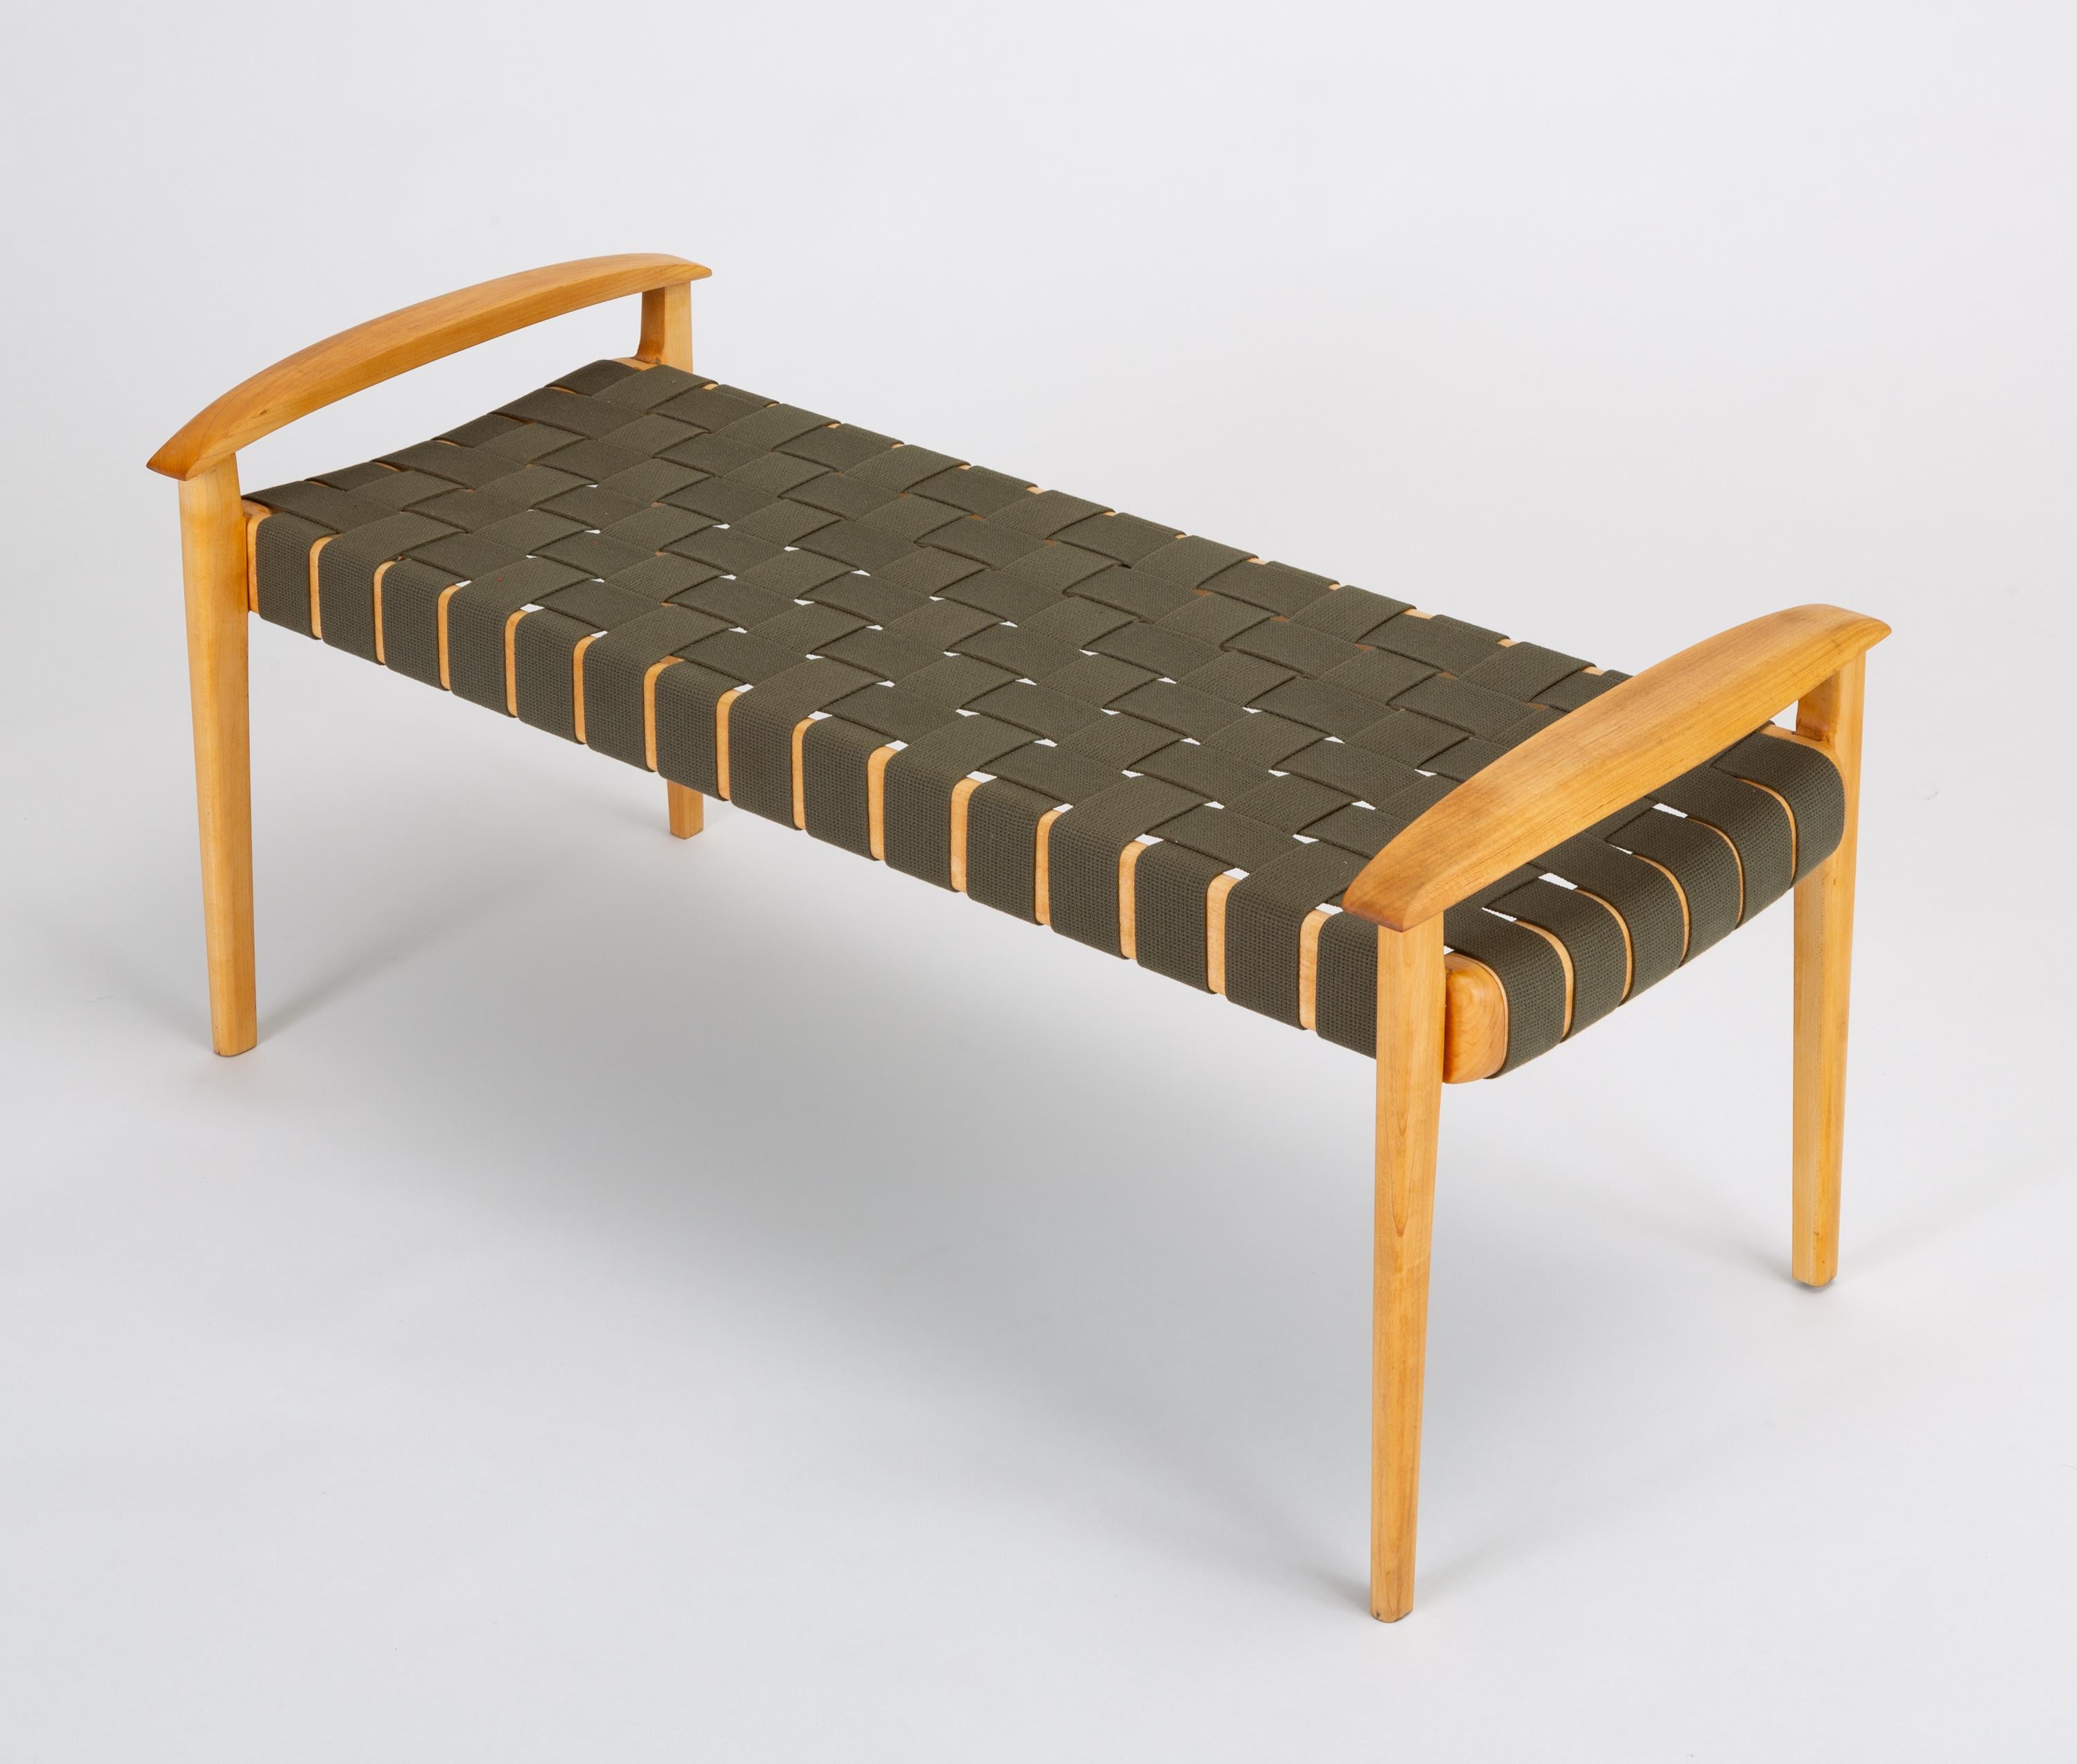 Contemporary American-Made Maple Bench with Woven Seat by Tom Ghilarducci